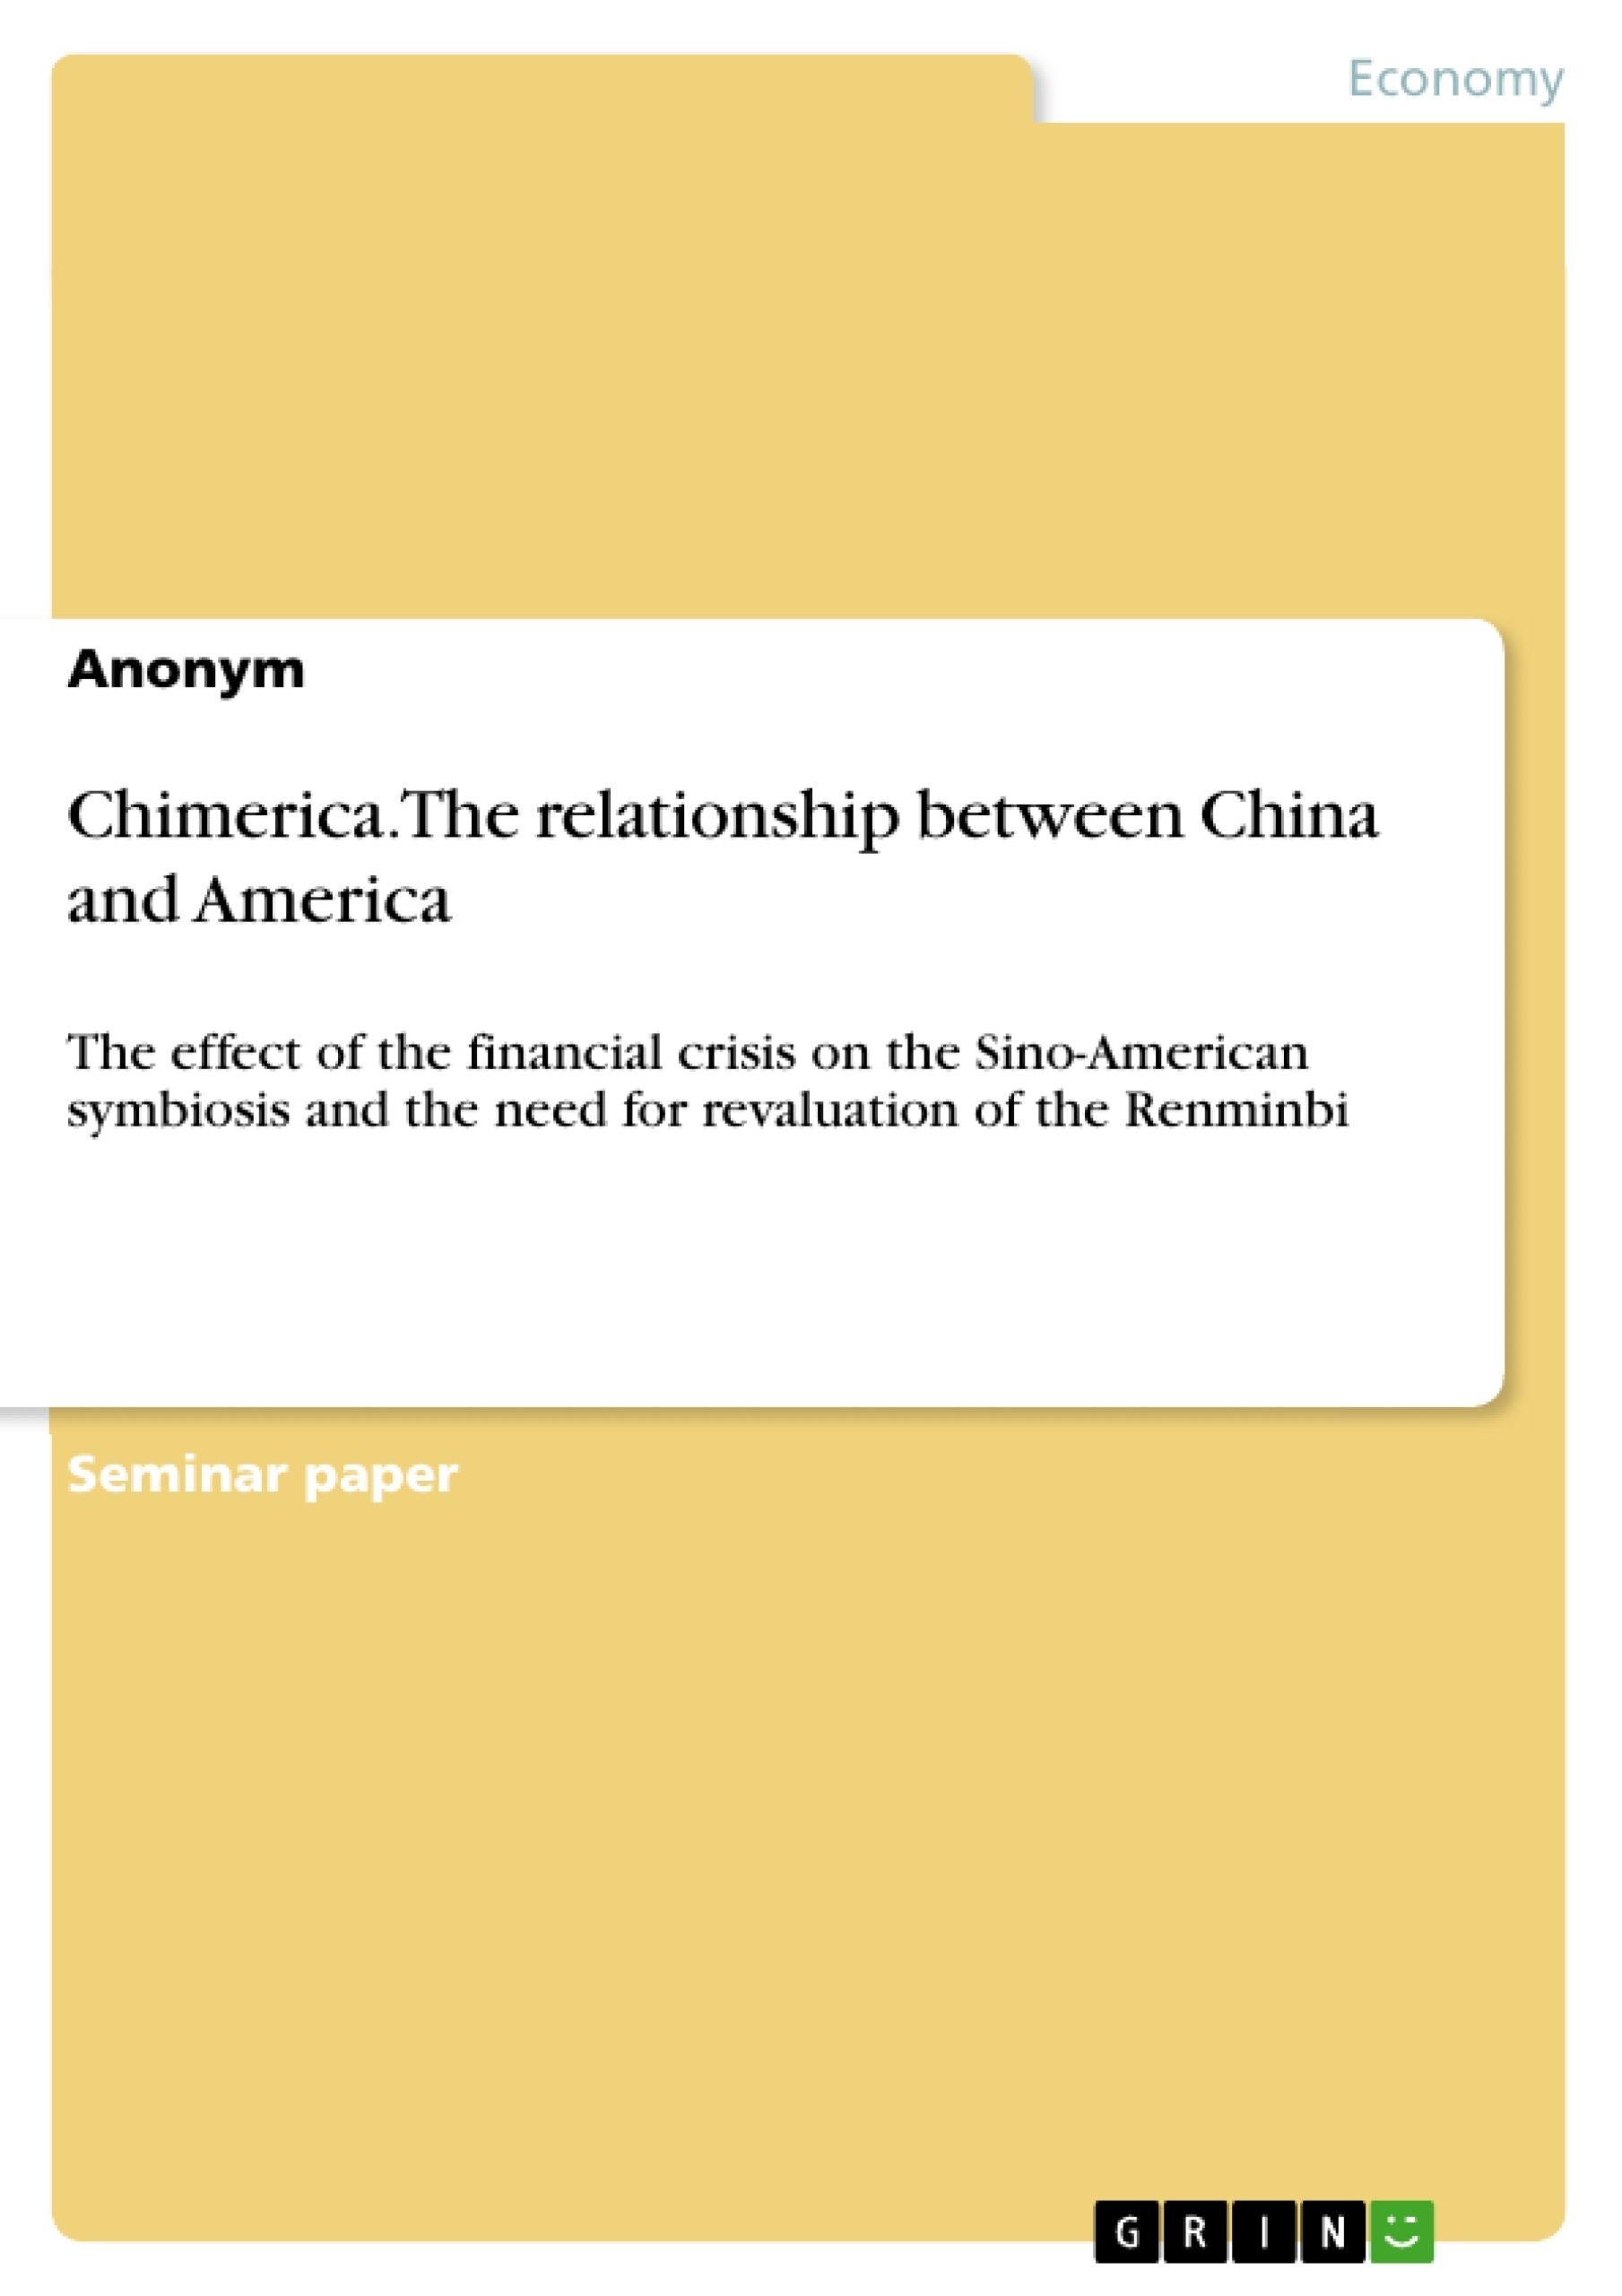 Title: Chimerica. The relationship between China and America